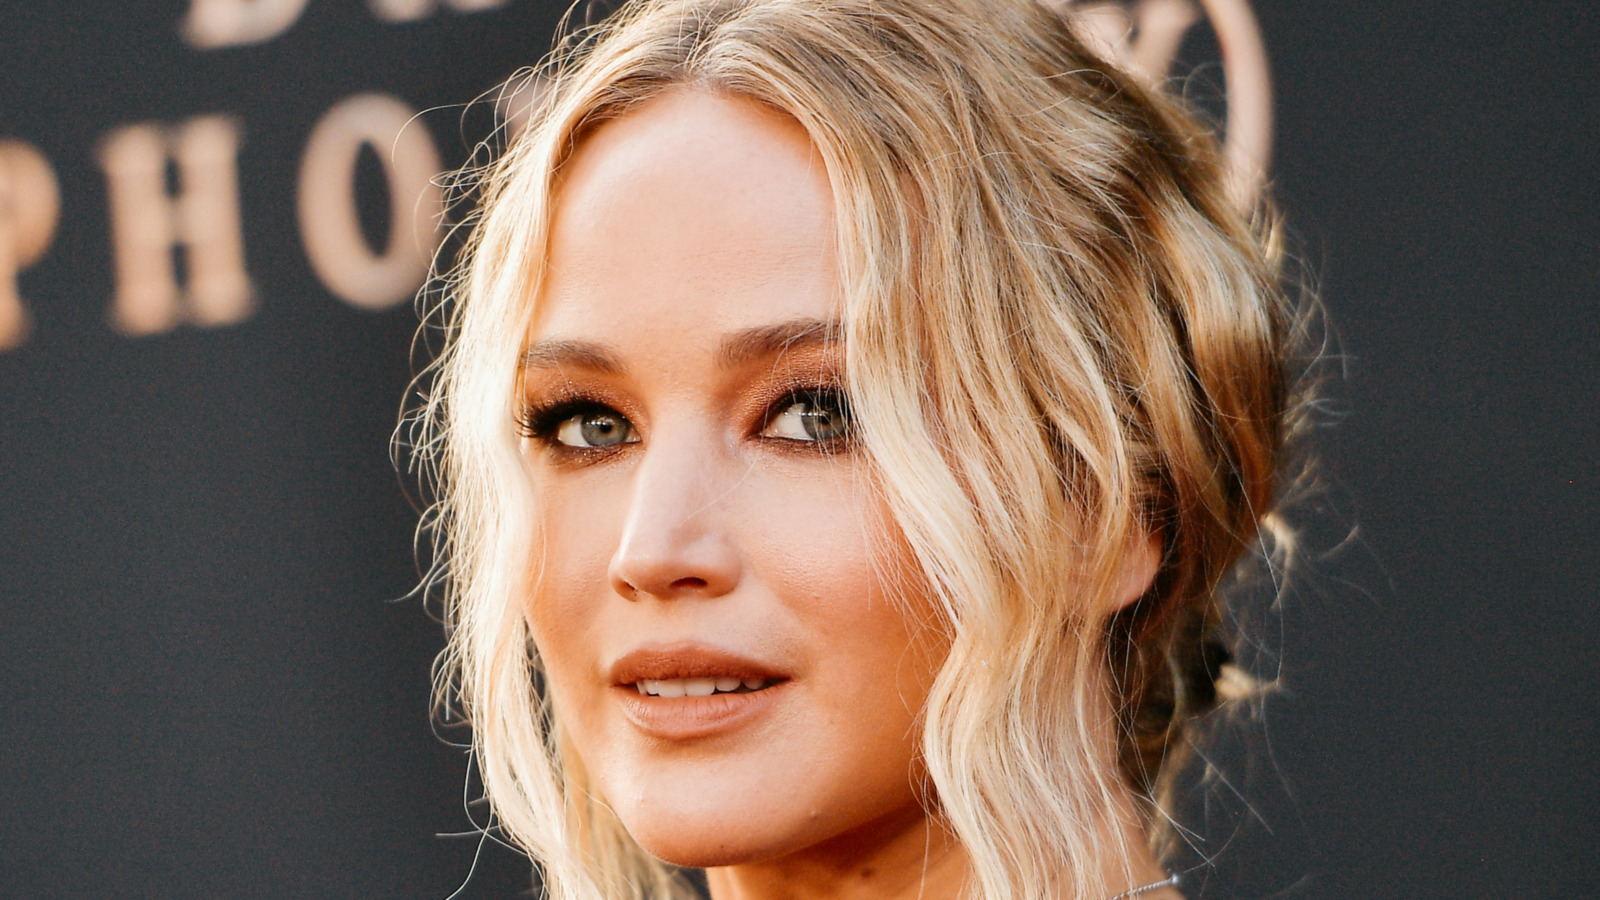 Don't Look Up, Jennifer Lawrence: 'Spitting in front of Leonardo DiCaprio was embarrassing'